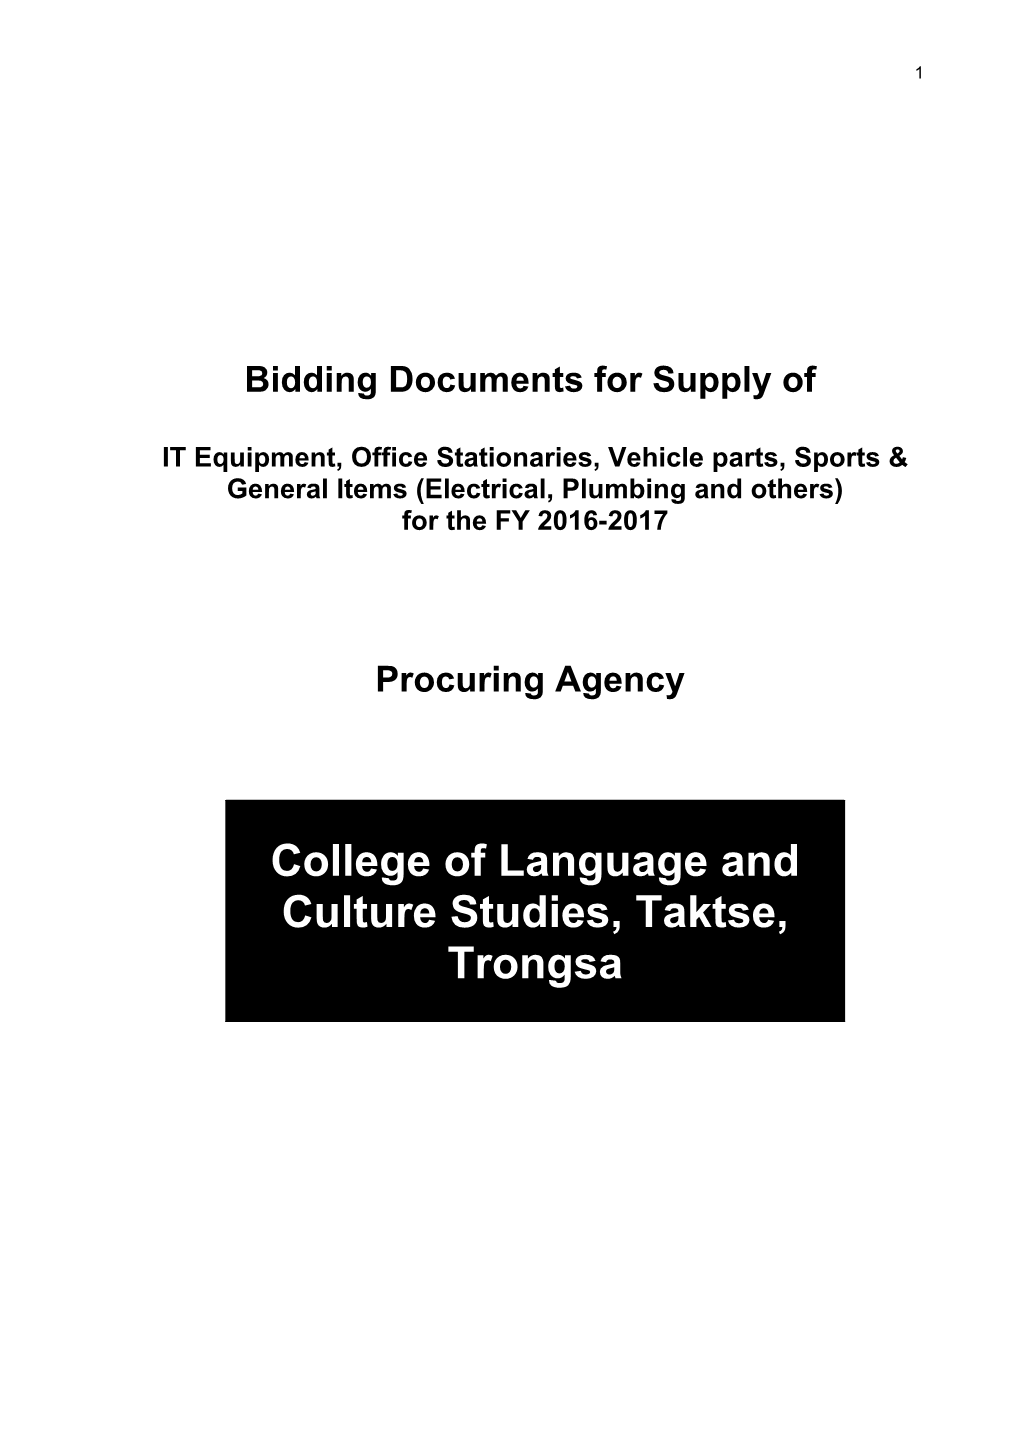 Bidding Documents for Supply Of